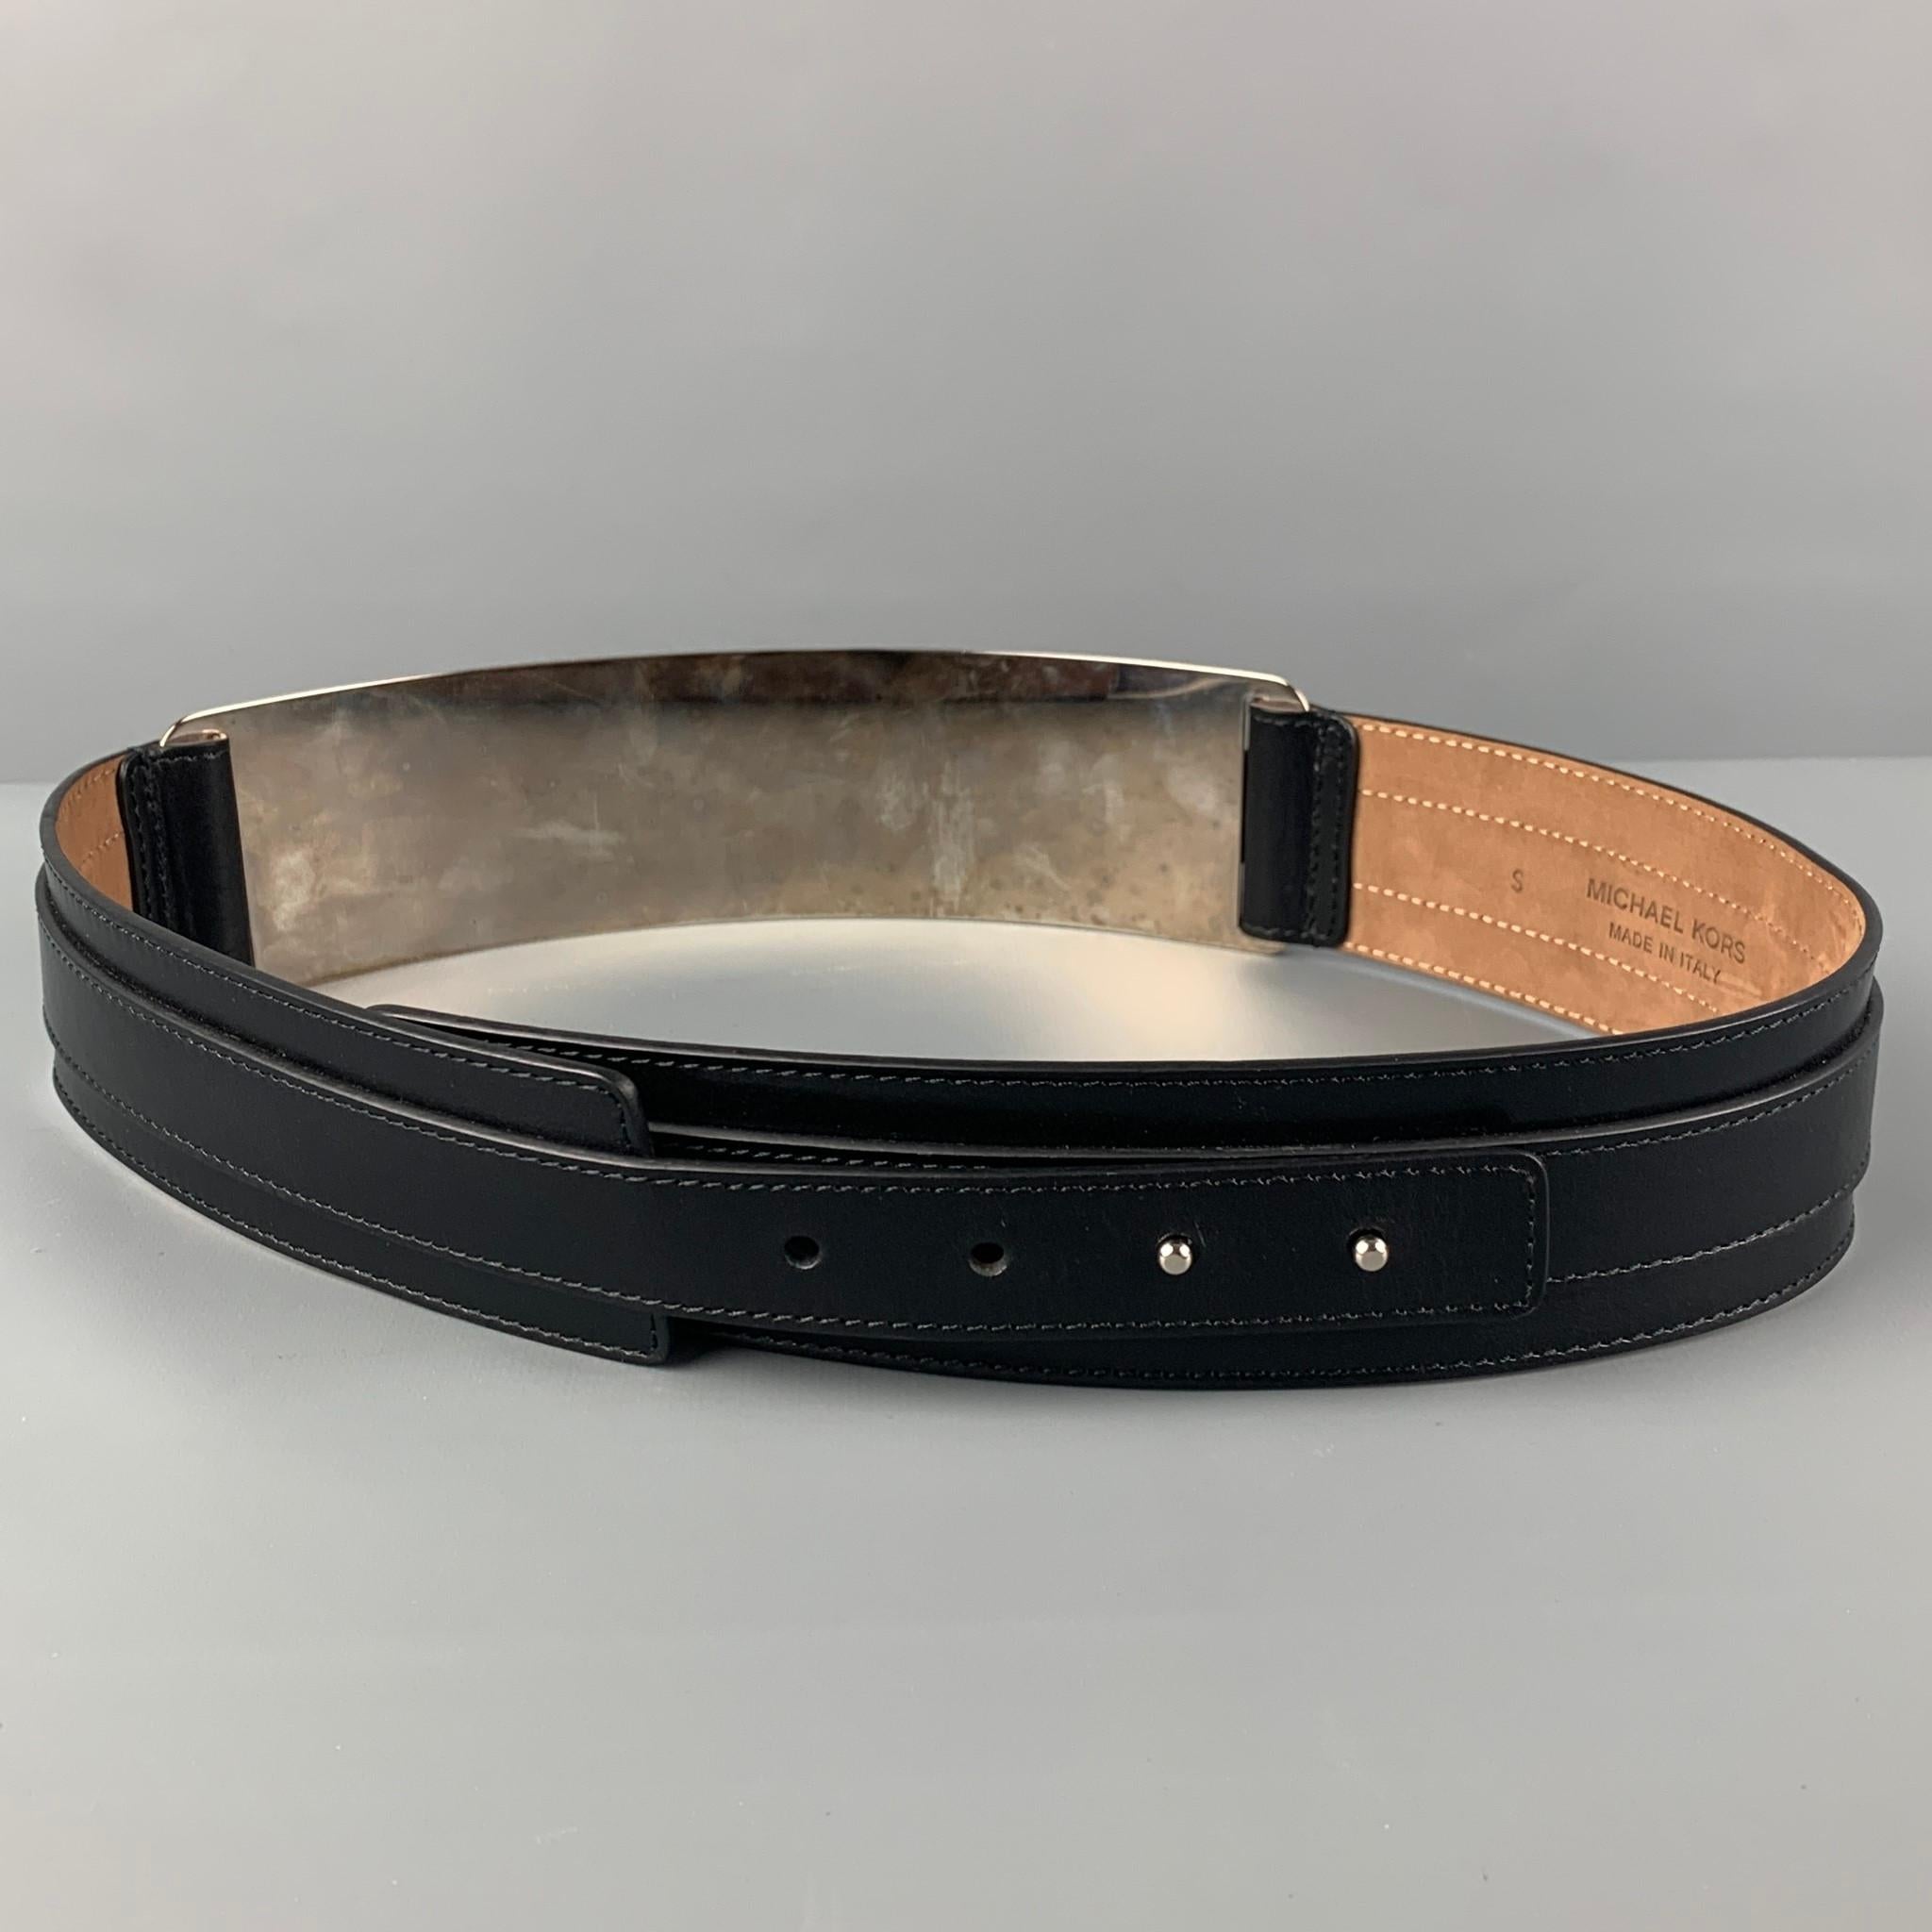 MICHAEL KORS belt comes in a black leather featuring a silver tone metal panel design and a front buckle detail. Made in Italy. 

Good Pre-Owned Condition.
Marked: S
Original Retail Price: $690.00

Length: 36.5 in.
Width: 2 in.
Fits: 33 in. - 36 in. 